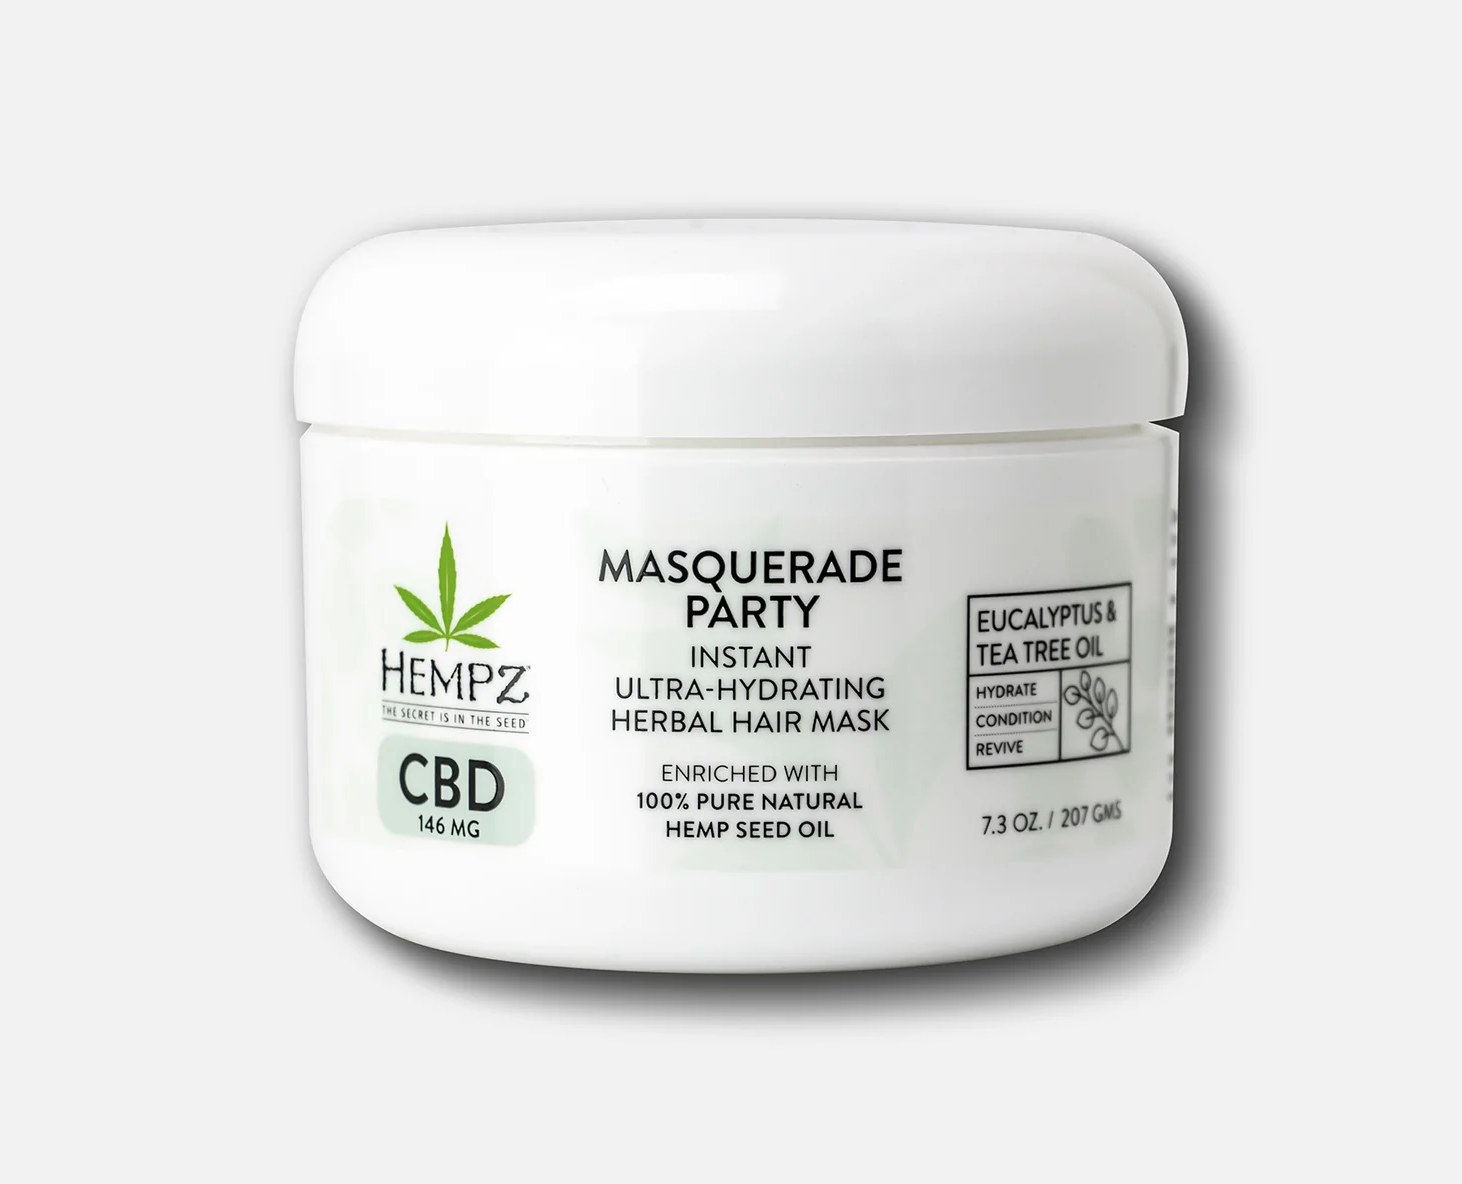 Hempz Masquerade Party Instant Ultra-Hydrating Hair Mask, 7.3 Oz. - $22.00